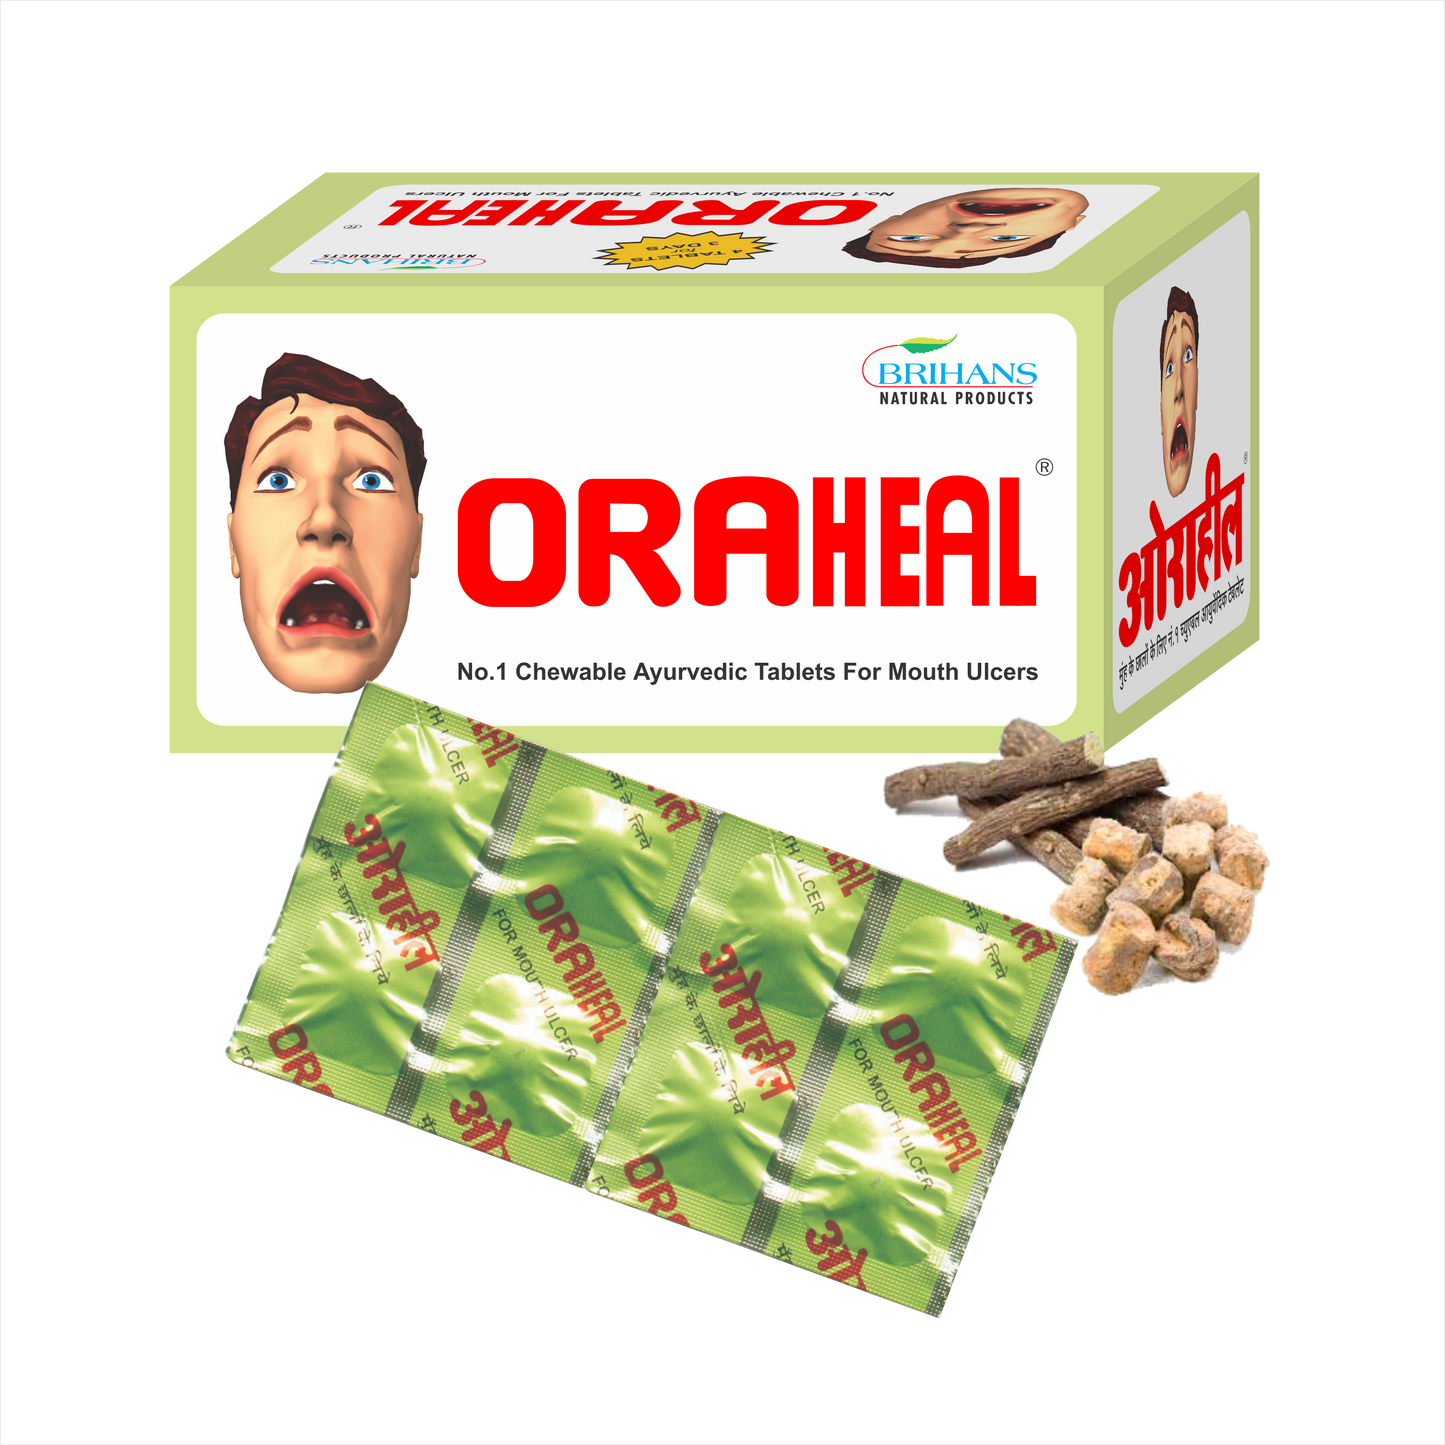 Oraheal Mouth Ulcer Tablets